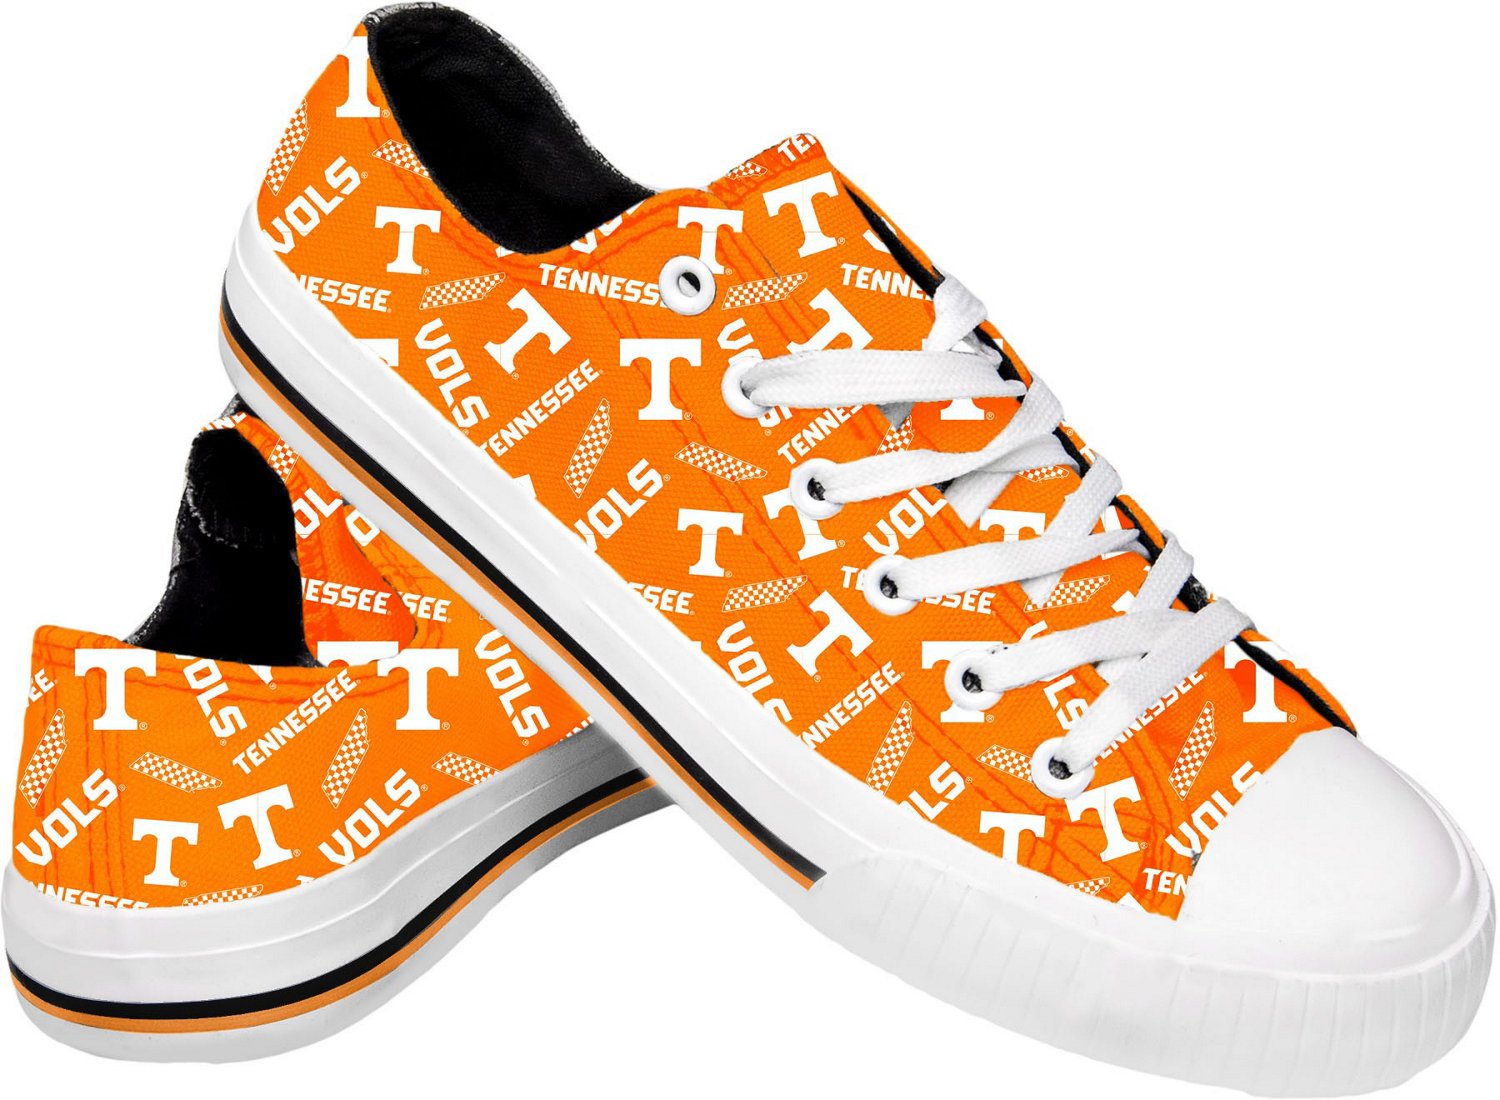 FOCO Womens NCAA College Repeat Print Low Top Canvas Sneakers Shoes 